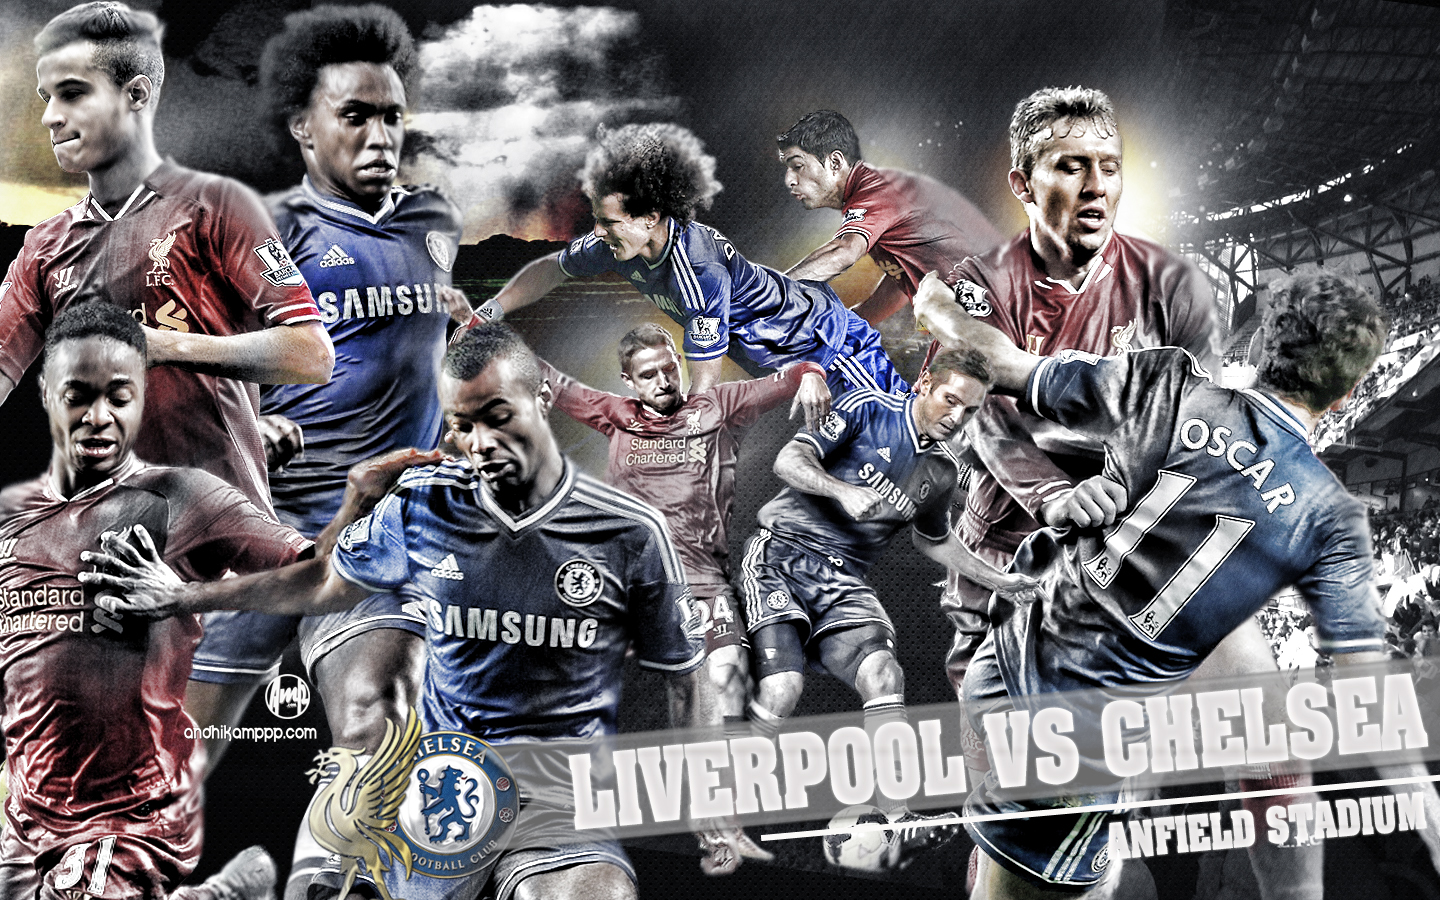 Liverpool Vs Chelsea EPL Match Preview, 11th May Online Stream